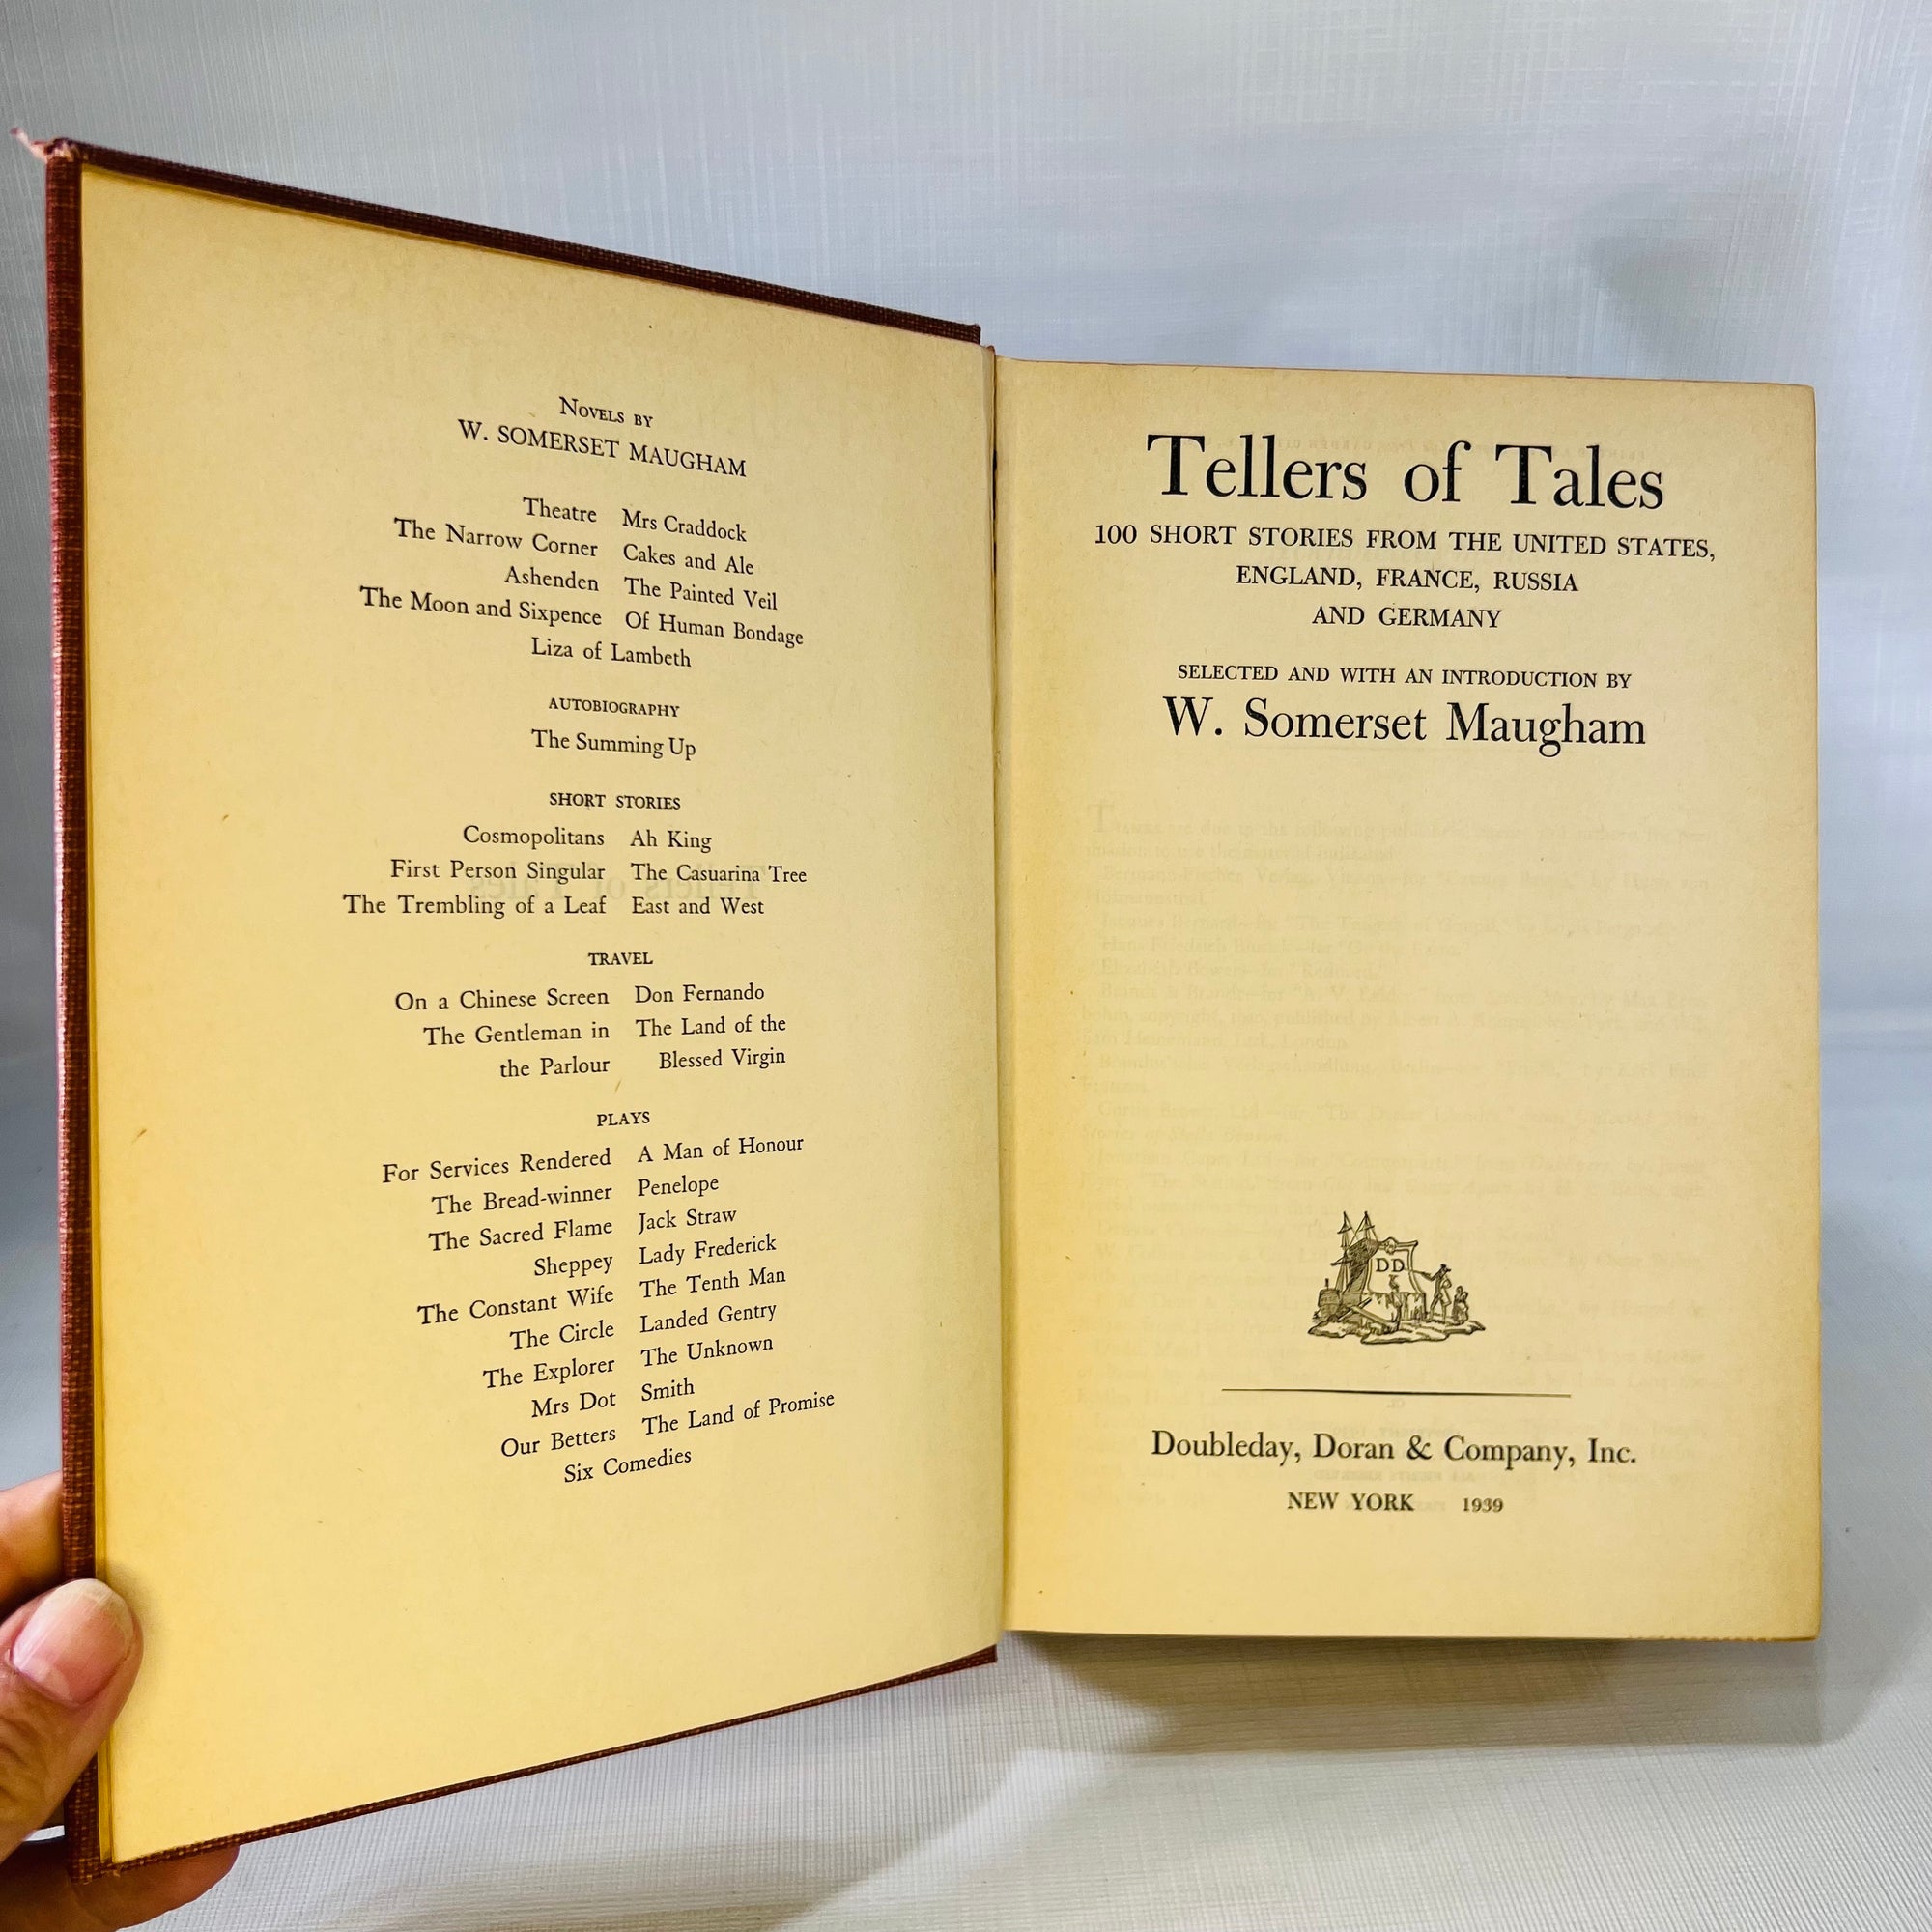 The Tellers of Tales 100 Short Stories from the United States, England, France & Germany Introduction by W. Summerset 1939 Maugham Doubleday, Doran, & Co.